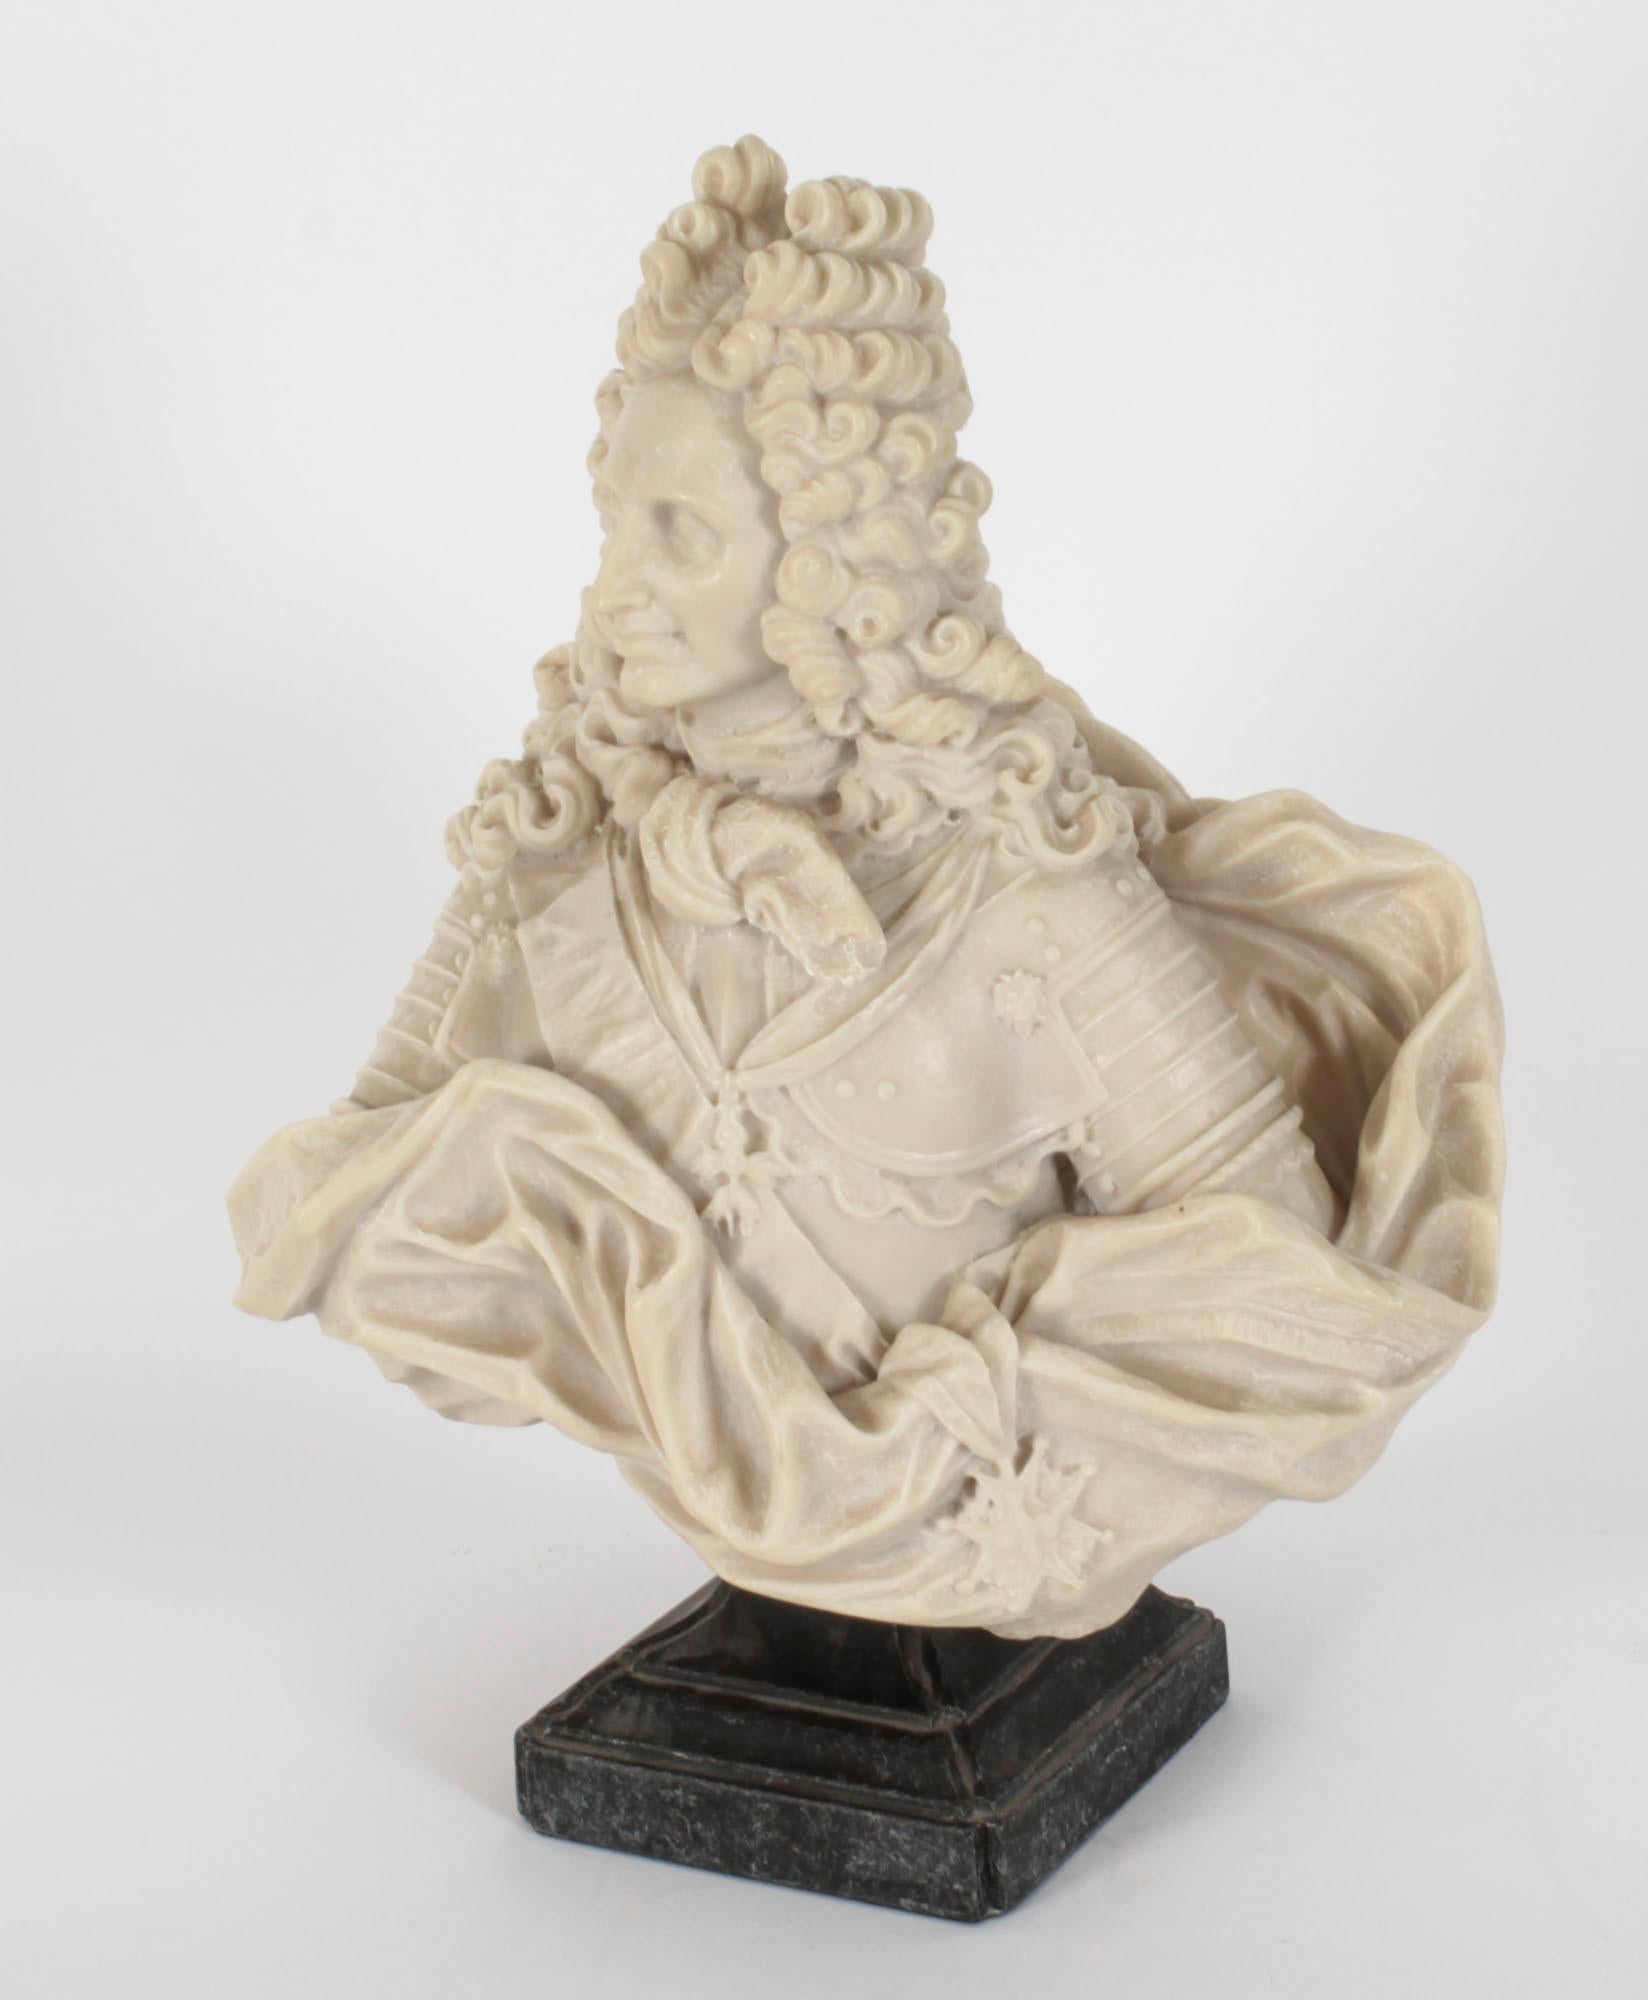 Antique Alabaster Portrait Bust of Philip V of Spain, Early 20th Century For Sale 2